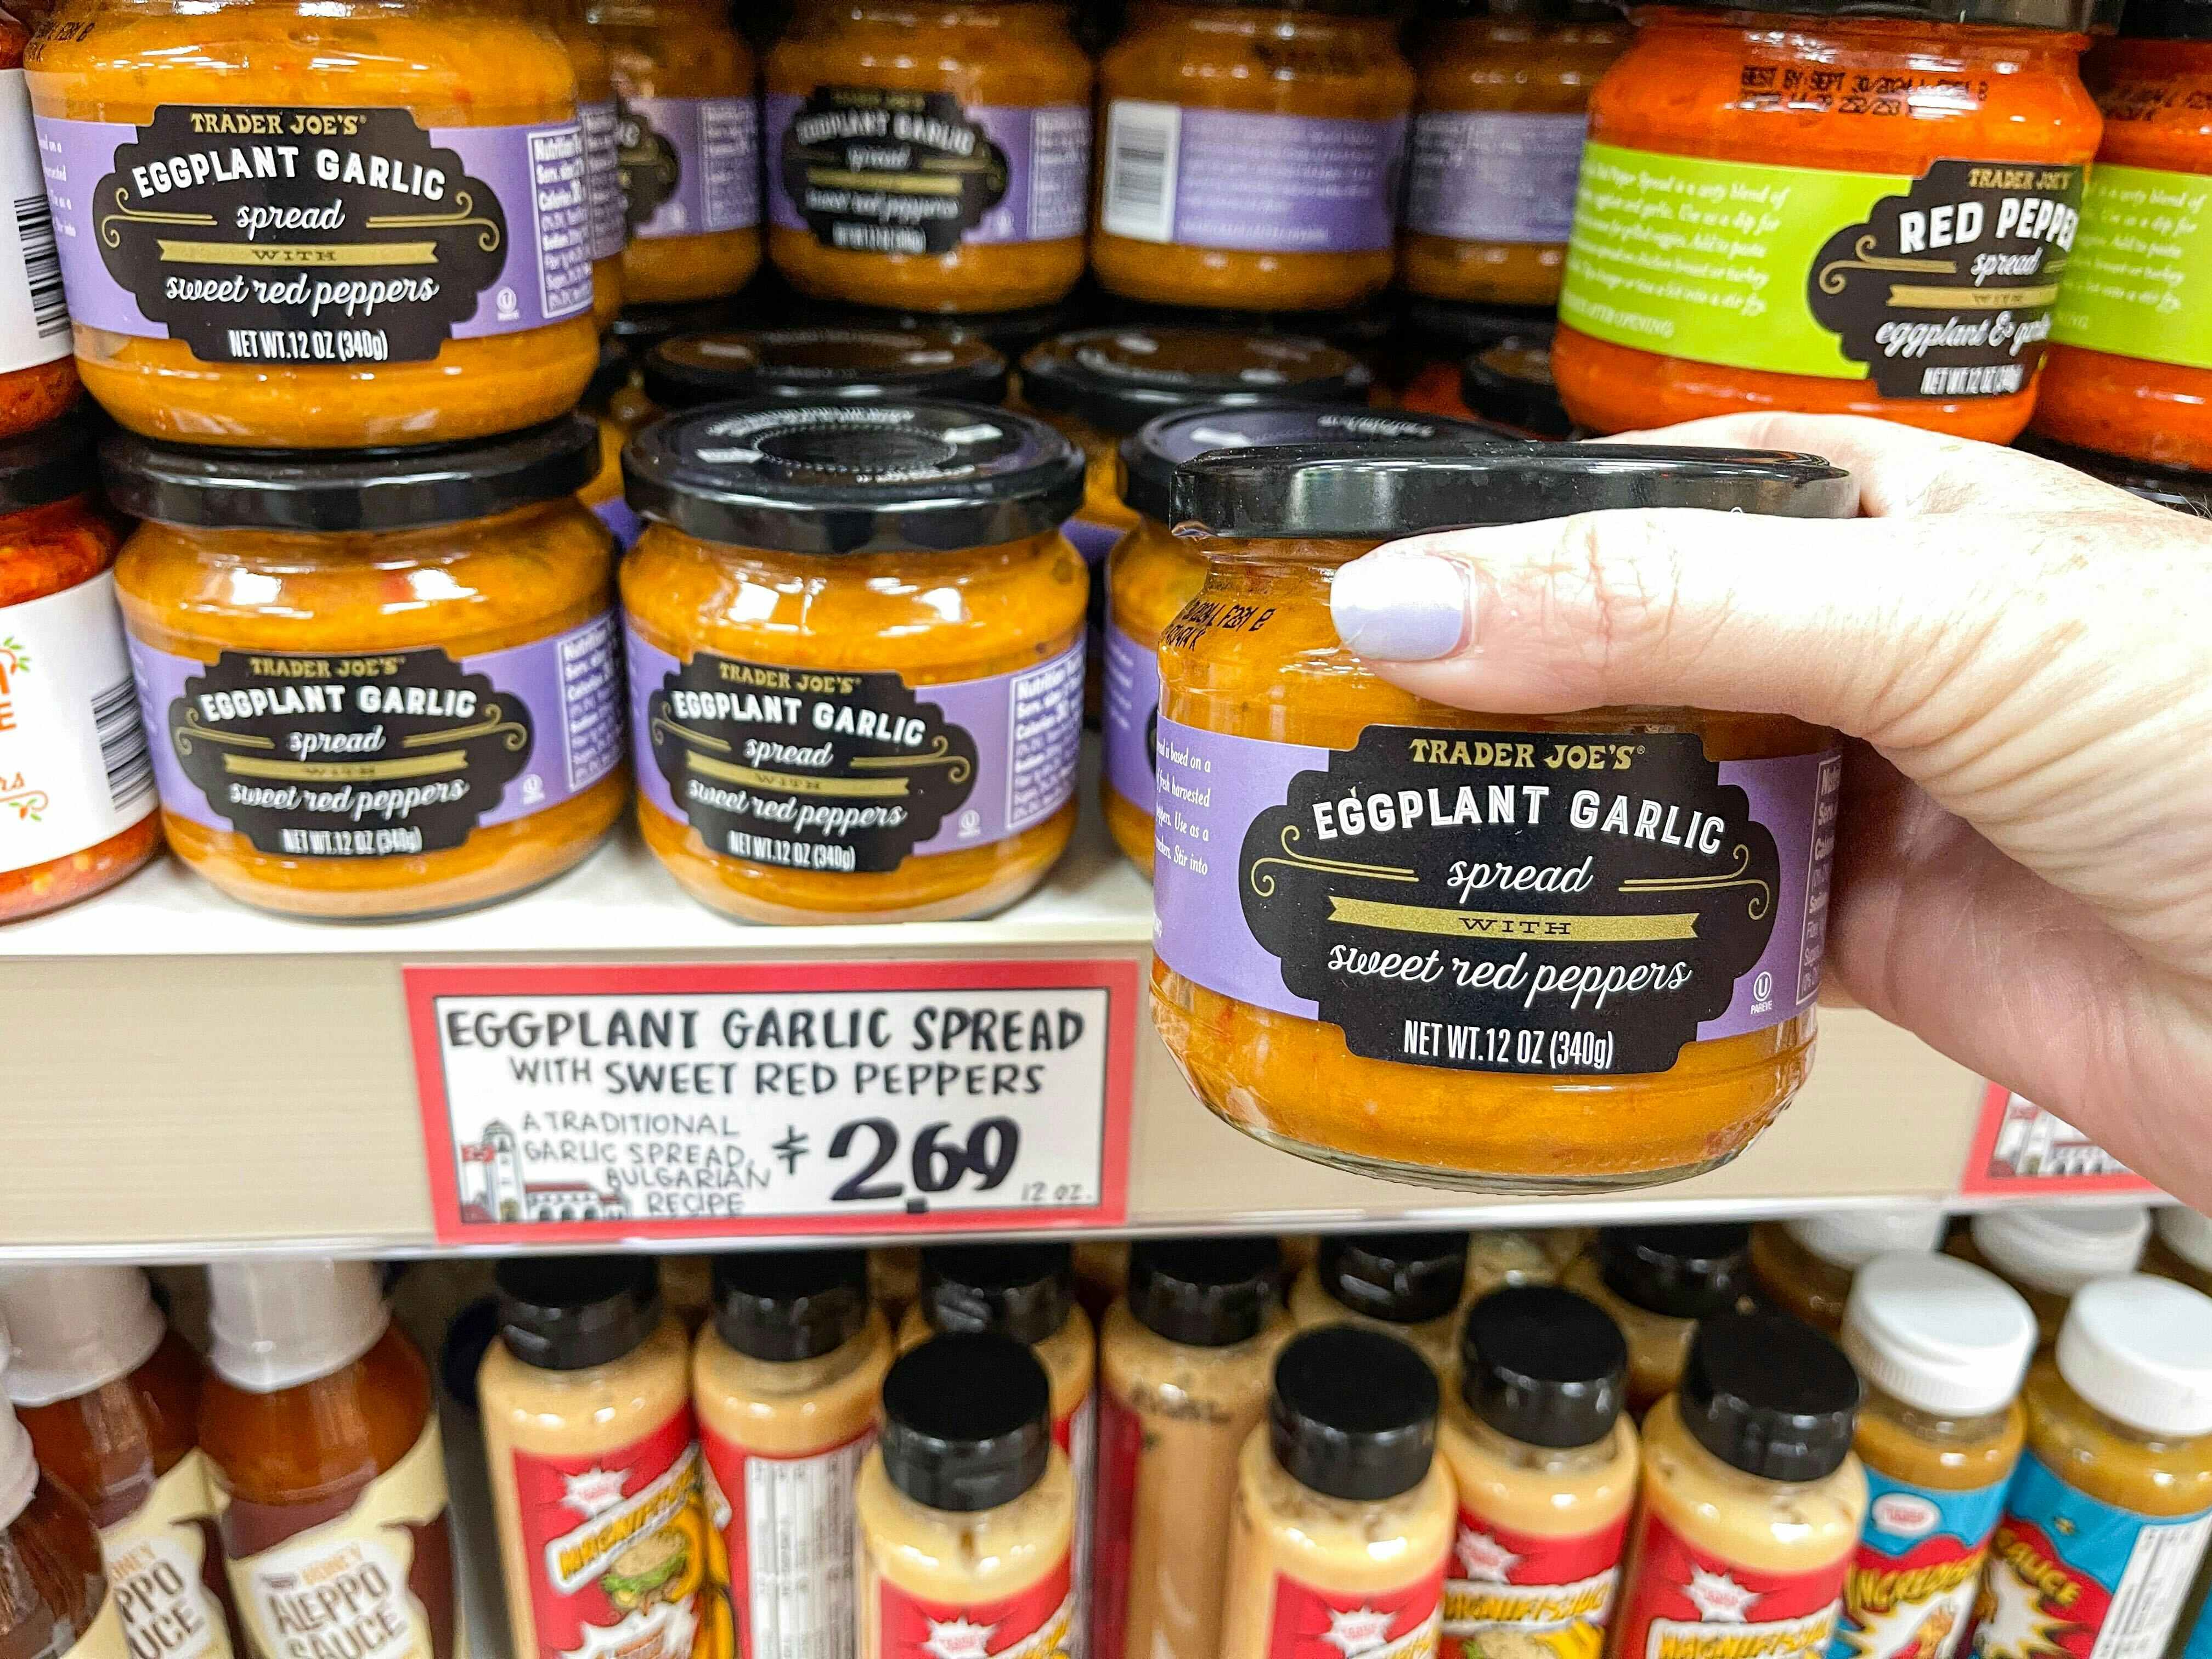 A person's hand holding a jar of Trader Joe's Eggplant Garlic Spread with Sweet Red Peppers in front of a shelf of them at Trader Joe's.